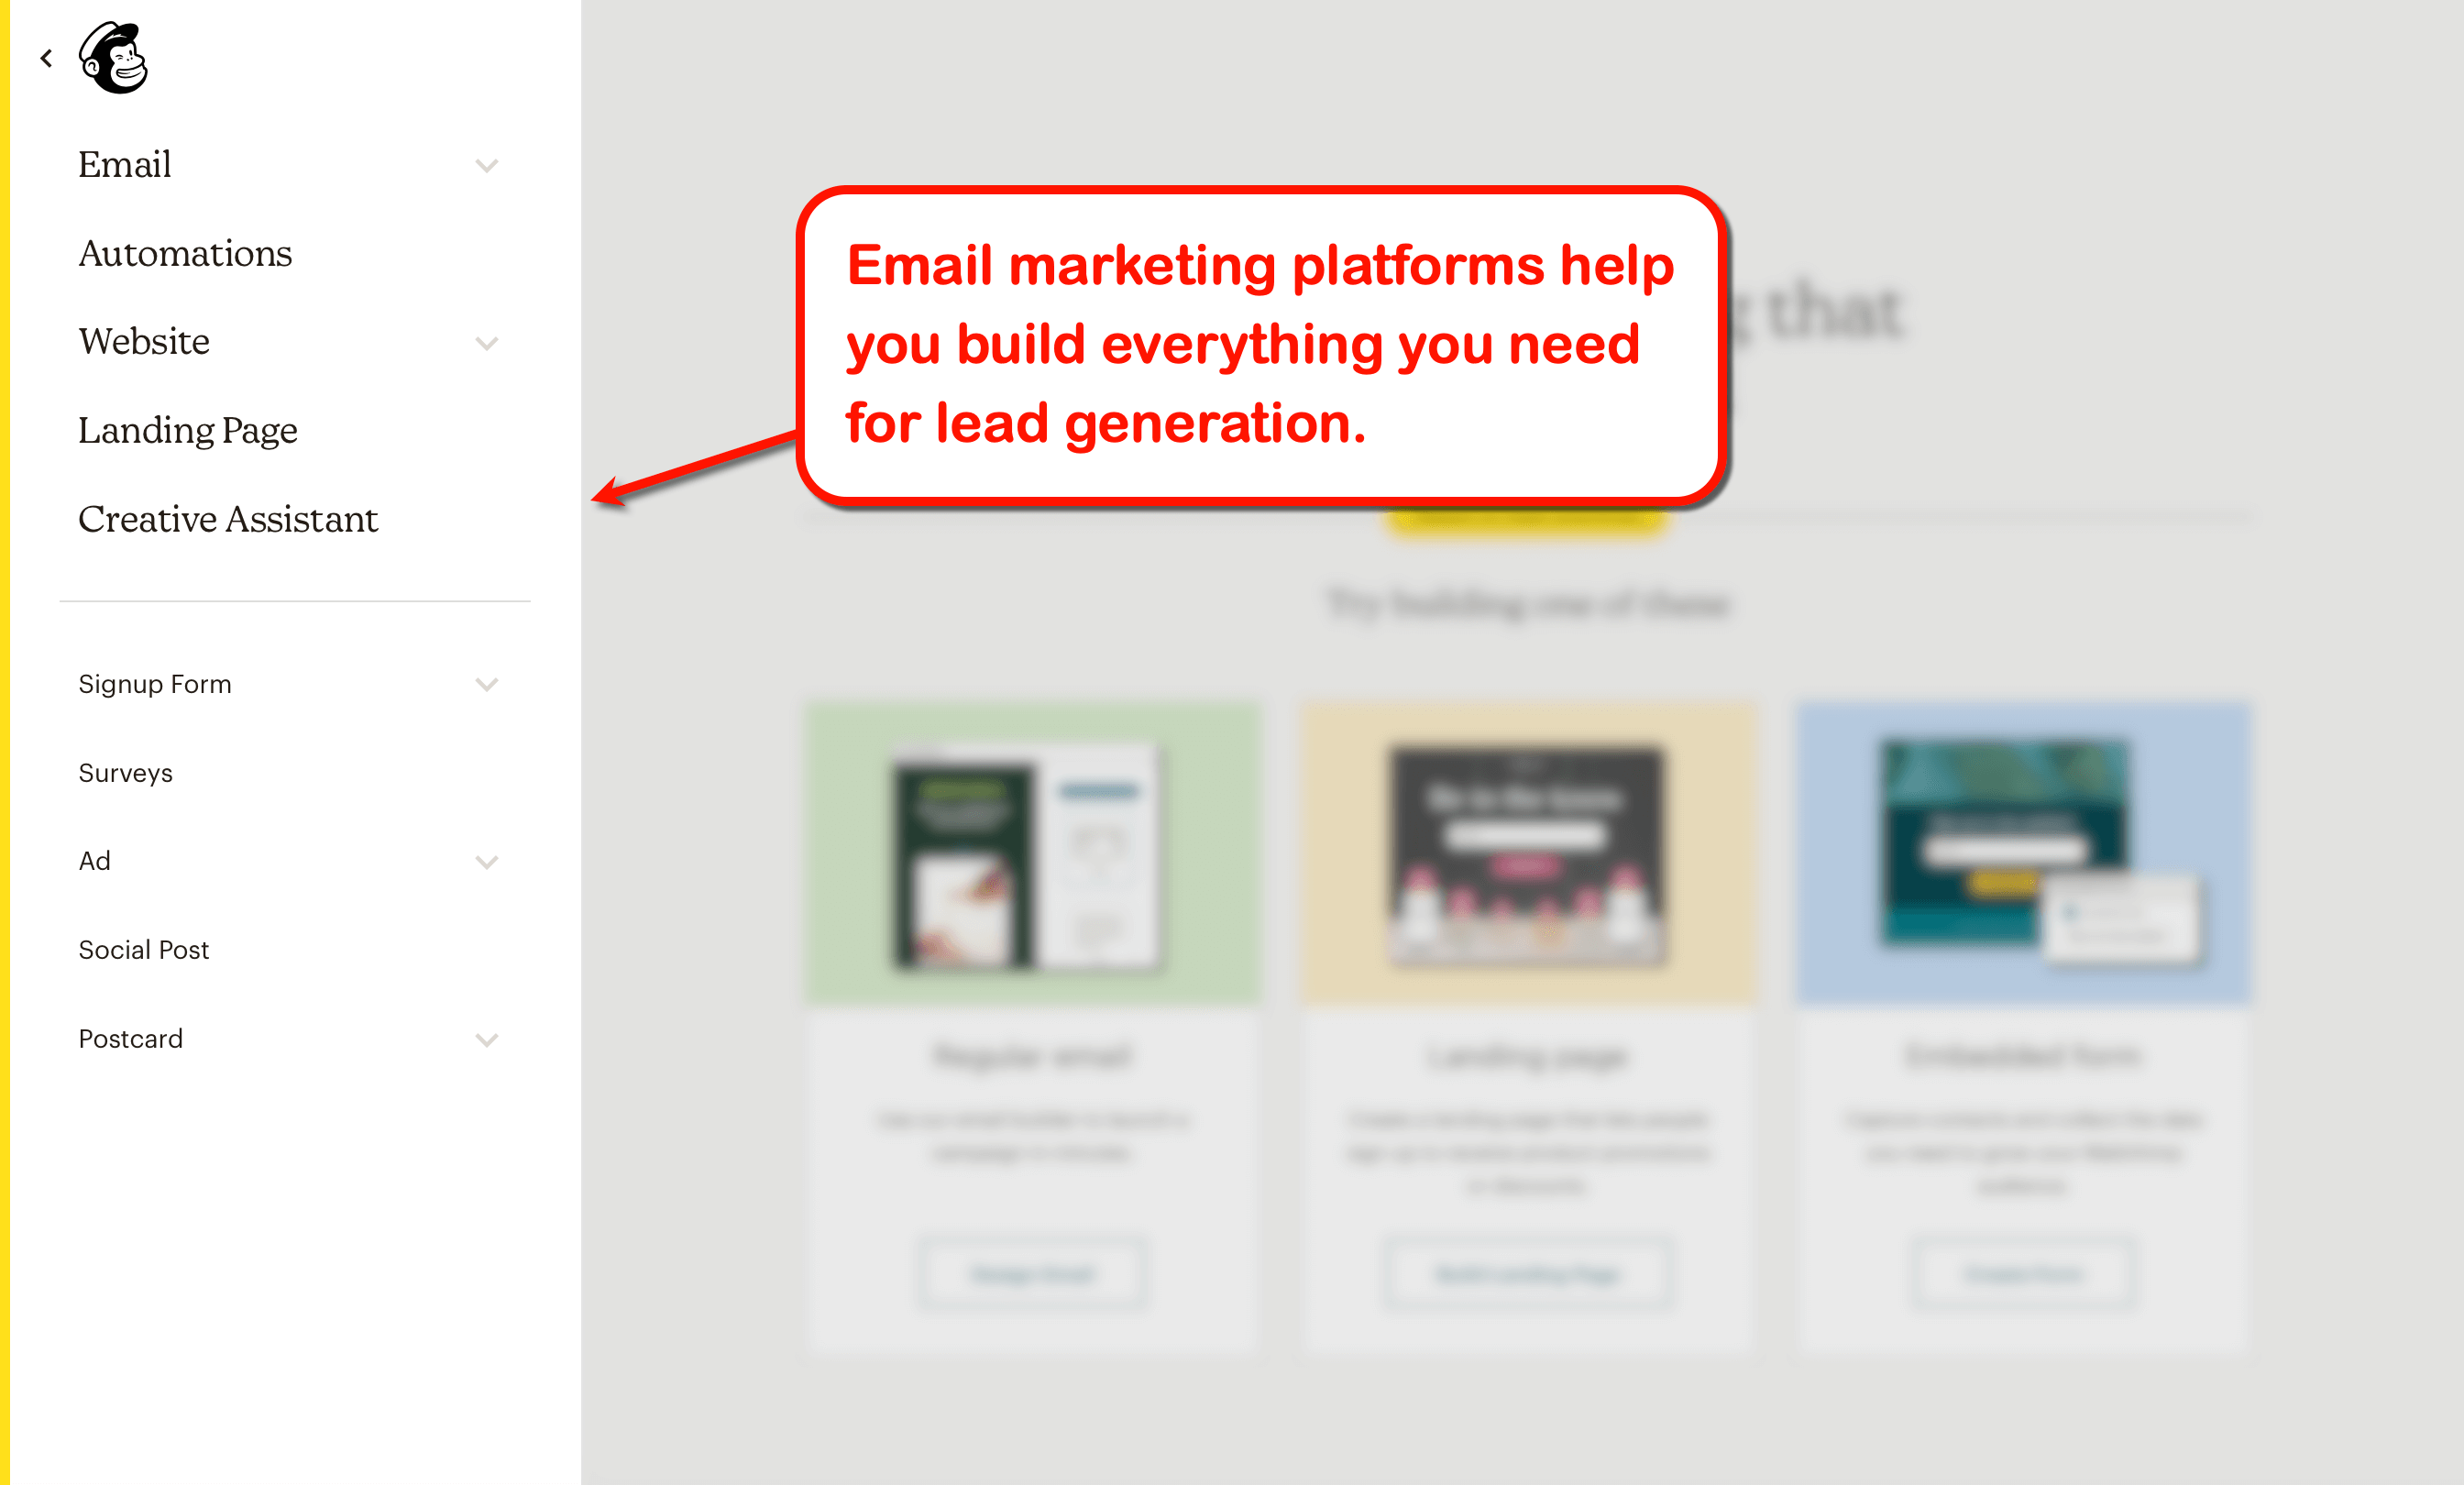 Create landing pages and manage your email list with Mailchimp.